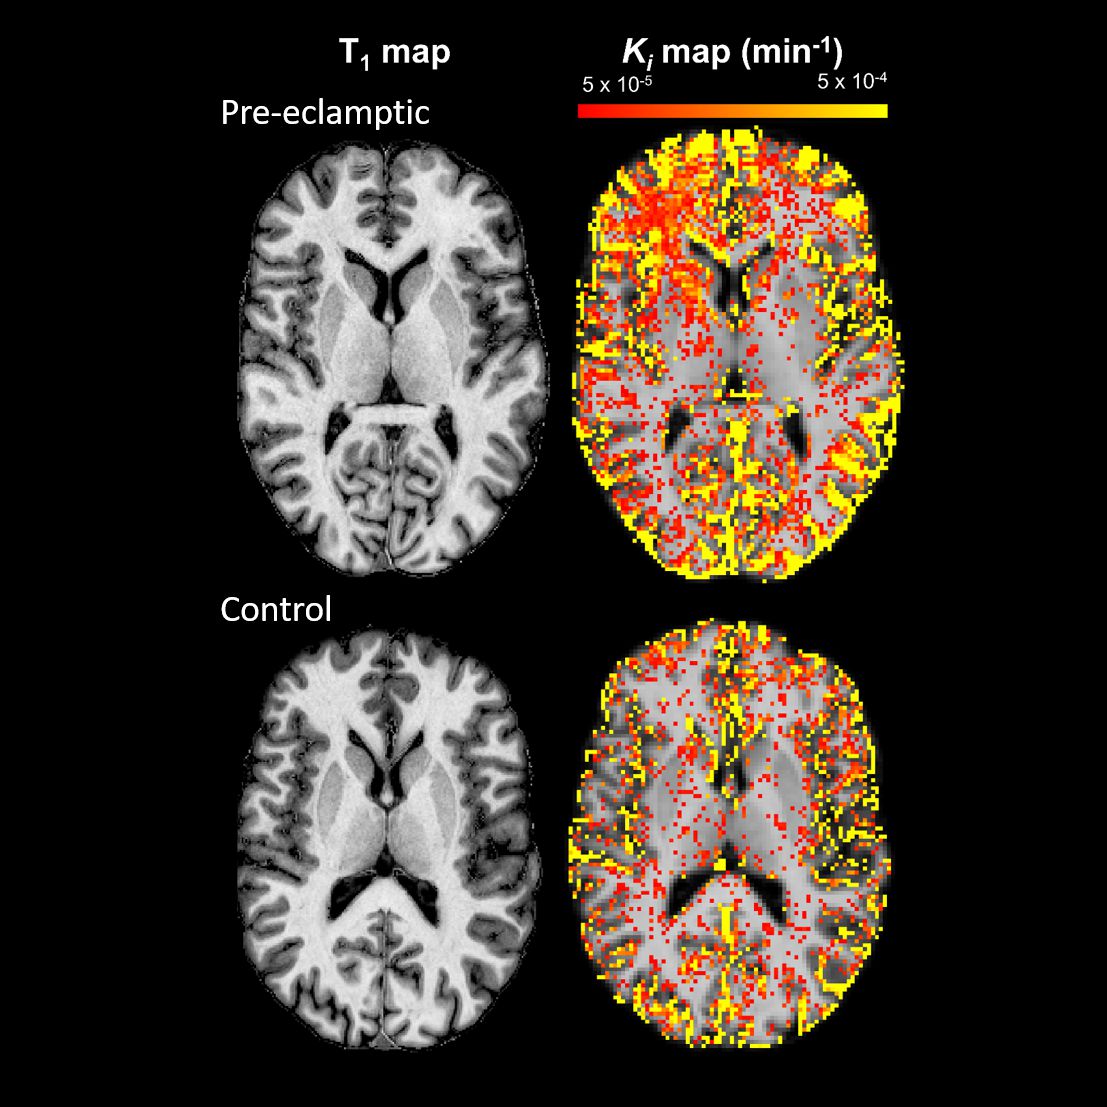 Maternal blood–brain barrier is impaired years after pre-eclampsia, shows #freeaccess MRI study by Canjels et al. published in the October #UOGJournal issue bit.ly/3VR0HNs #ISUOG @WileyHealth